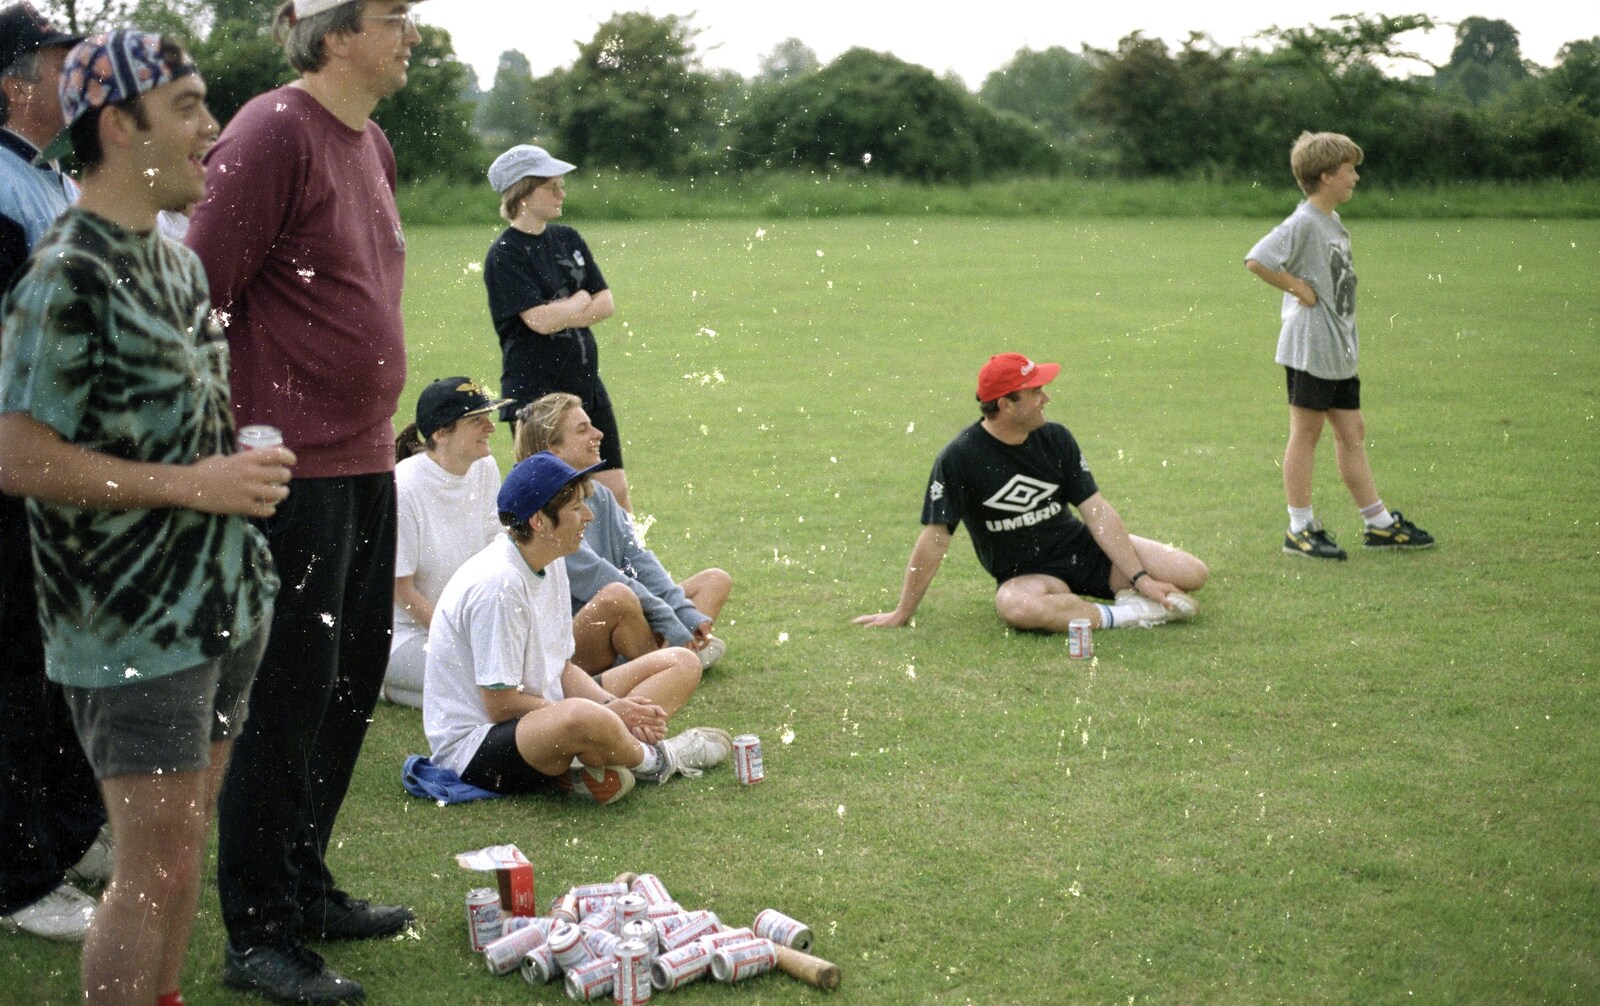 Clays Softball and Printec Reunion, Ditchingham and Stoke Ash, Suffolk - 2nd June 1994: A pile of discarded beer cans